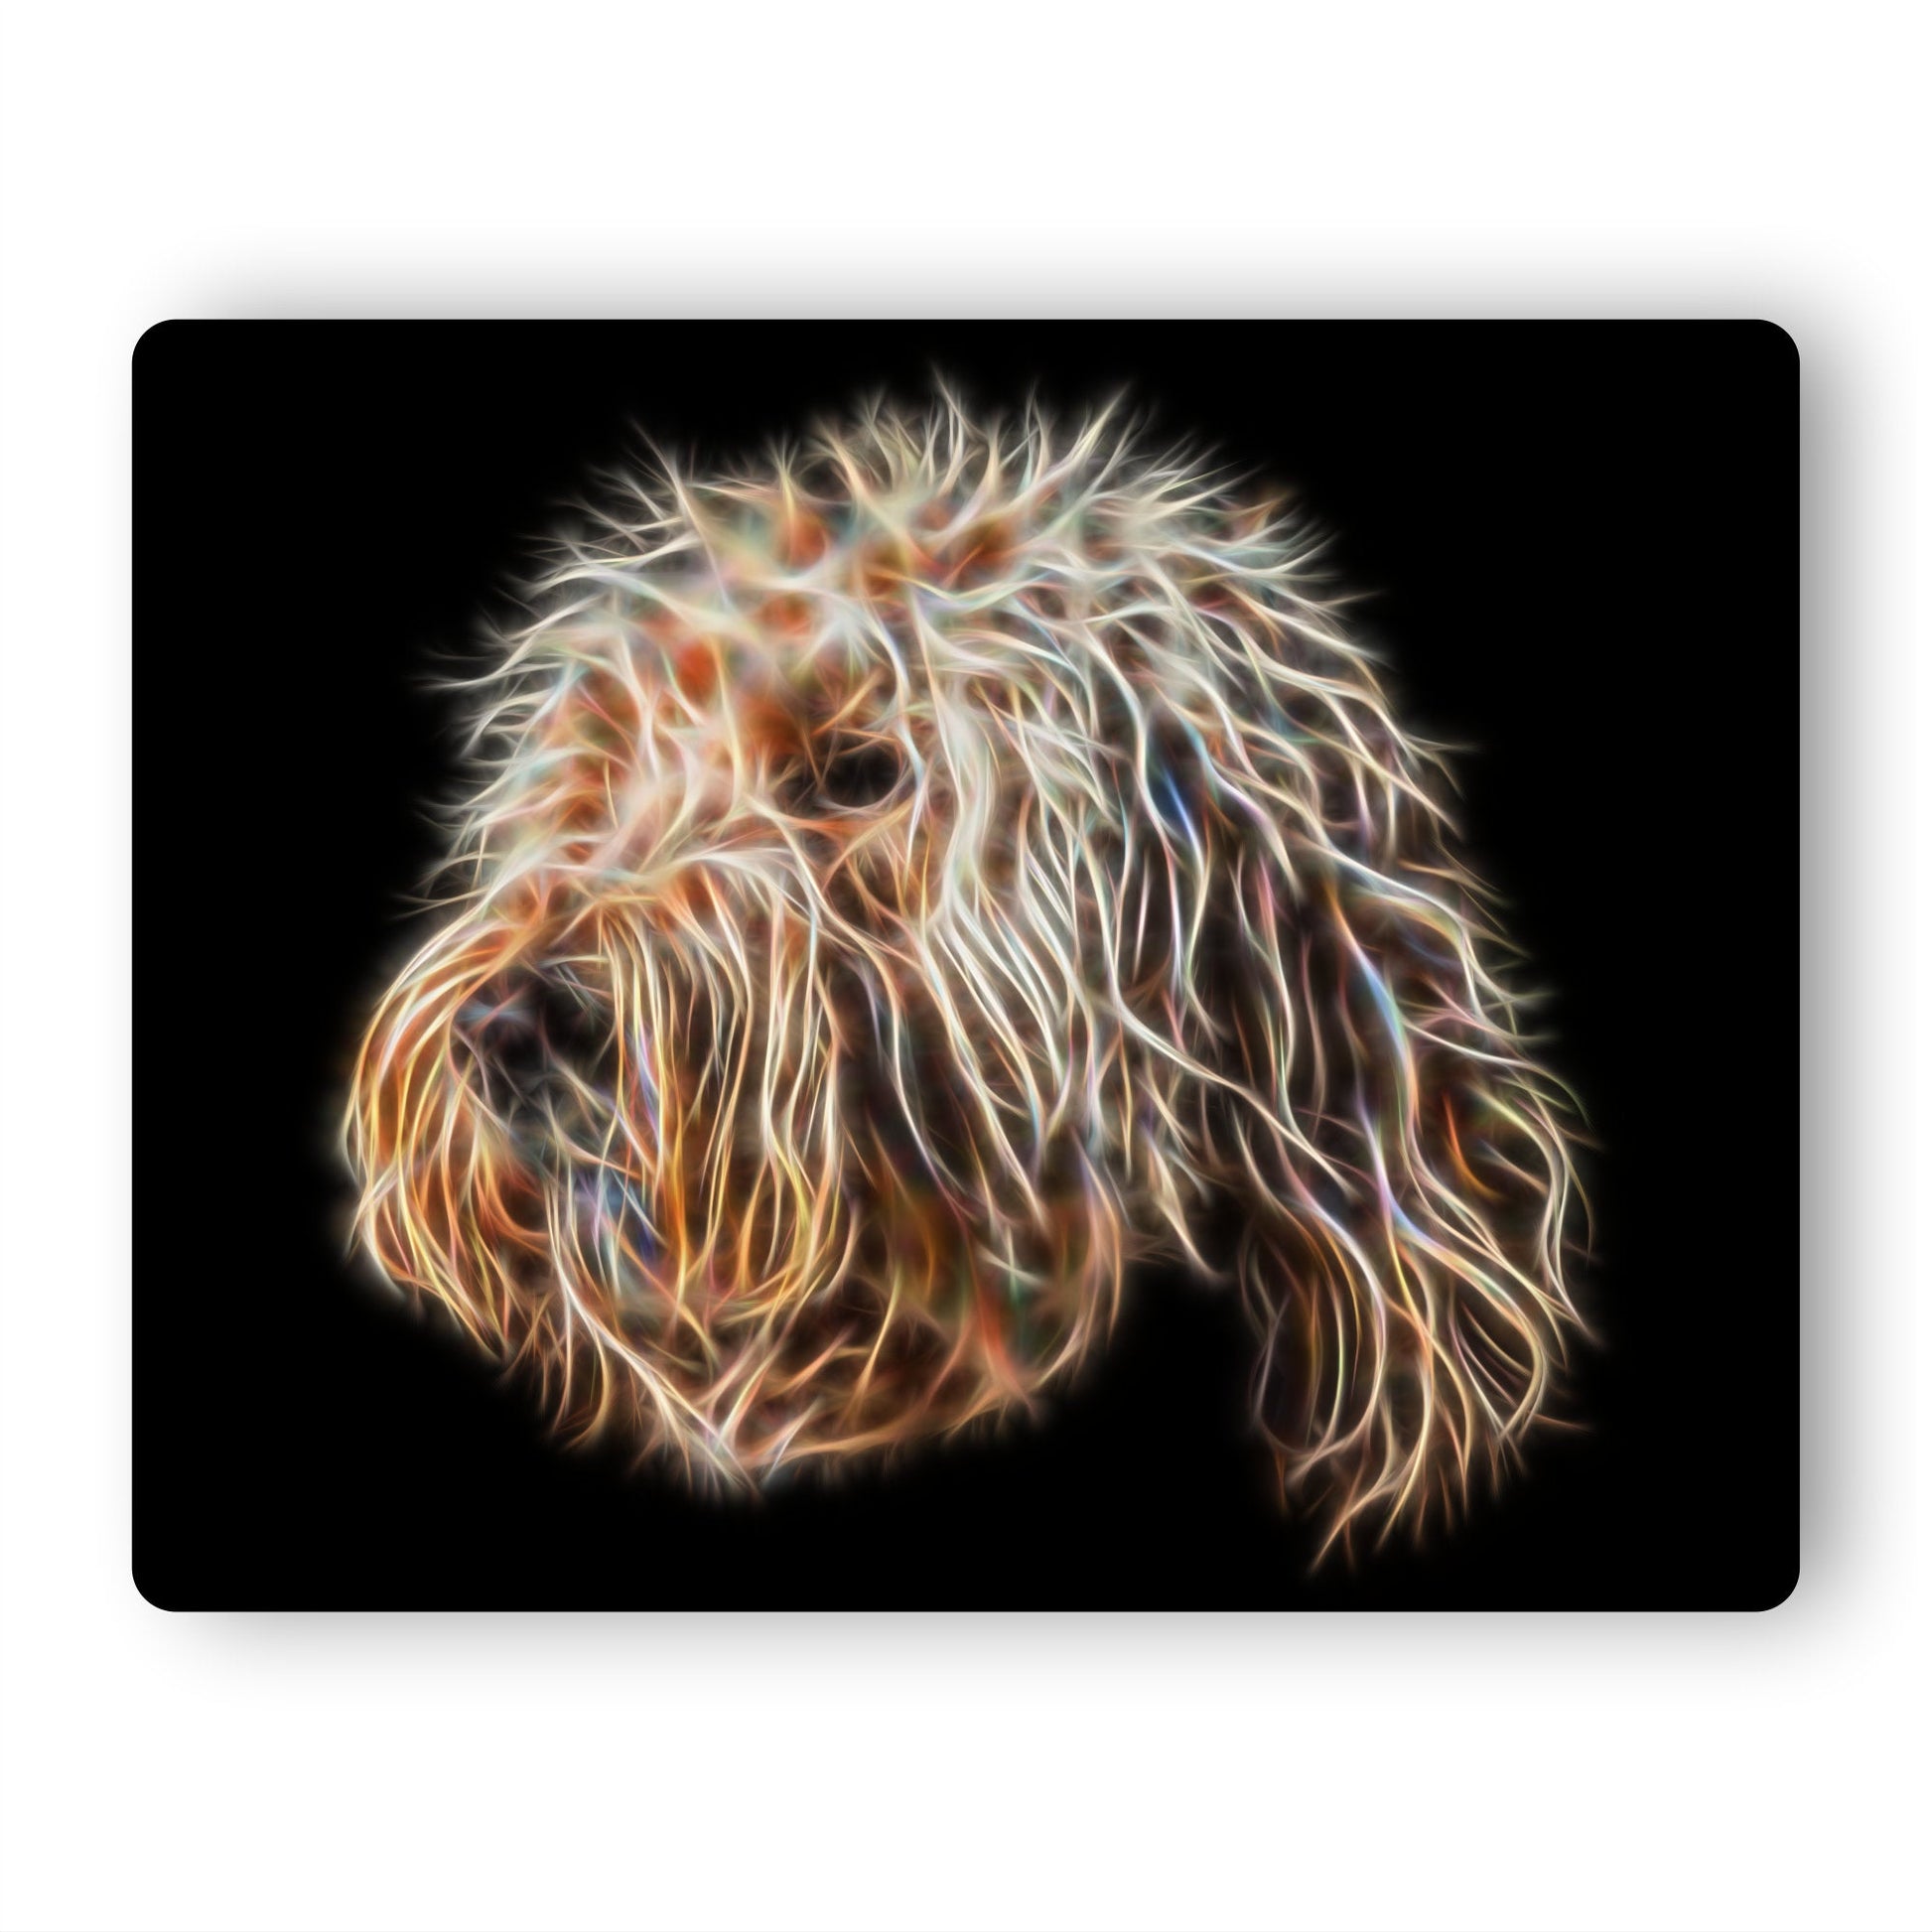 Gold Labradoodle Metal Wall Plaque with Stunning Fractal Art Design.